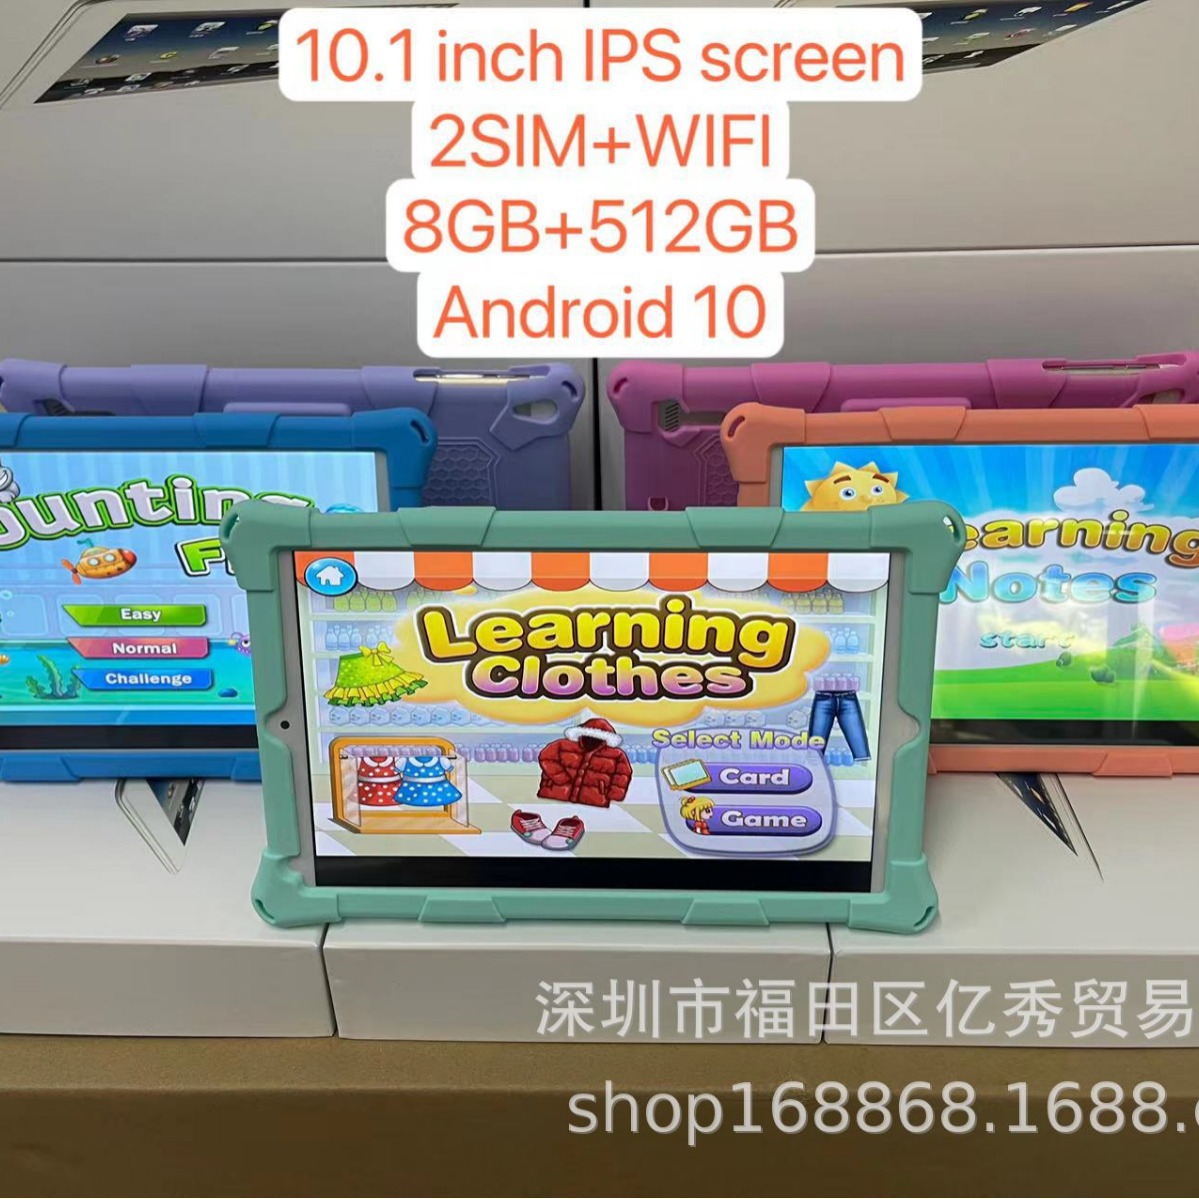 New model Tablet Pc for kids 105跨境10.1寸Unbreakable Screen